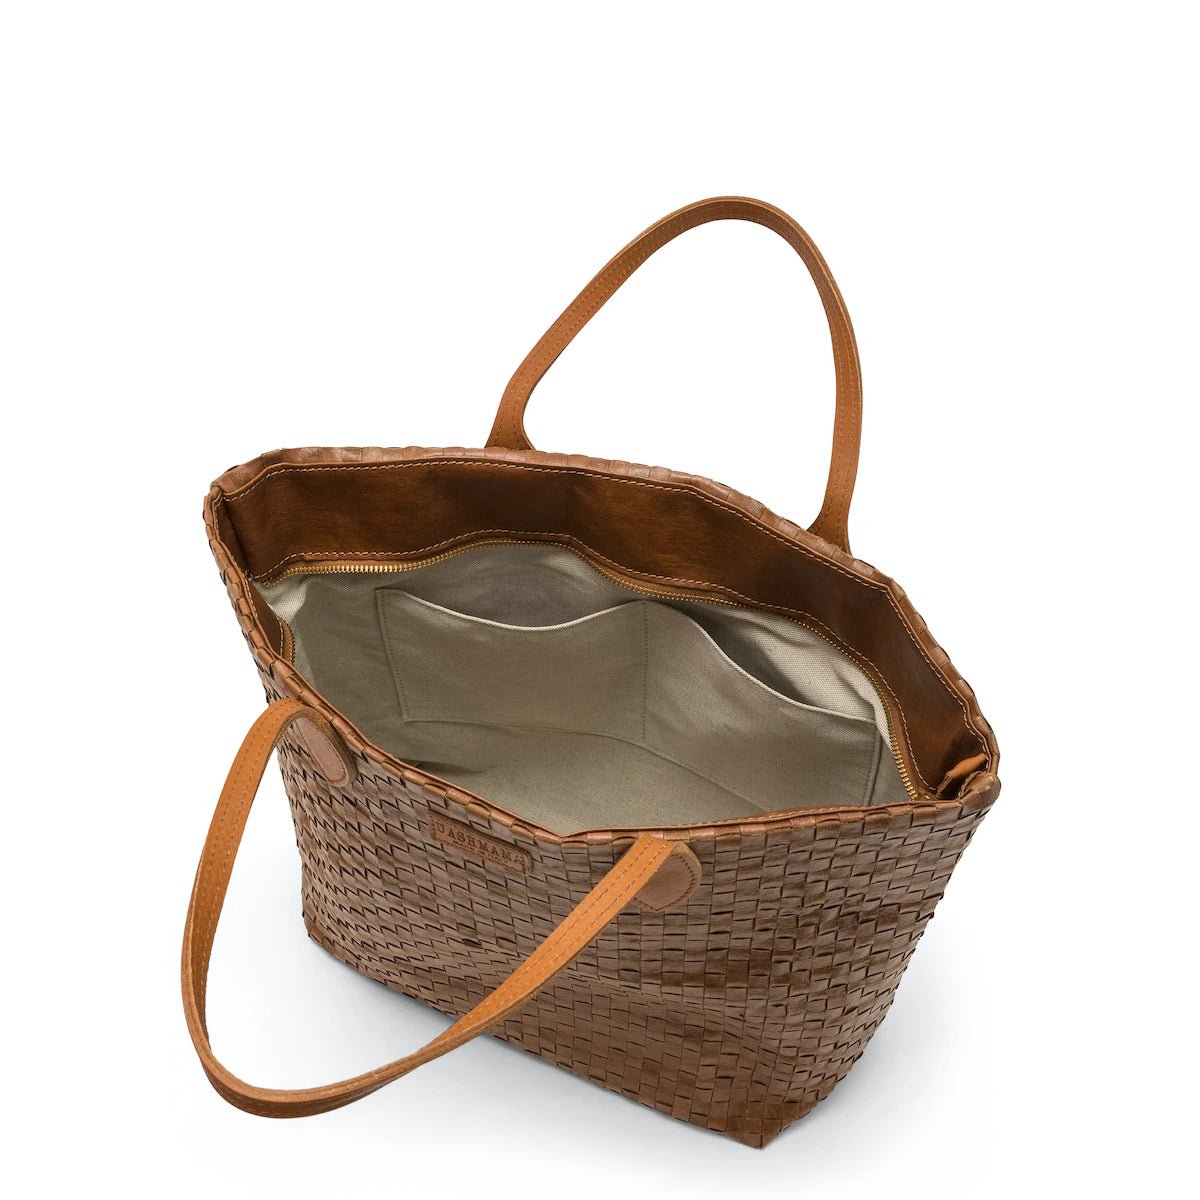 A large washable paper woven tote is shown open and showing the interior. The interior shows an organic cotton lining and two small interior pockets. The bag closes with a zip. It has two long tan leather handles and a tan leather UASHMAMA logo label on the outside in between the handles. The bag shown is in a dark tan colour.